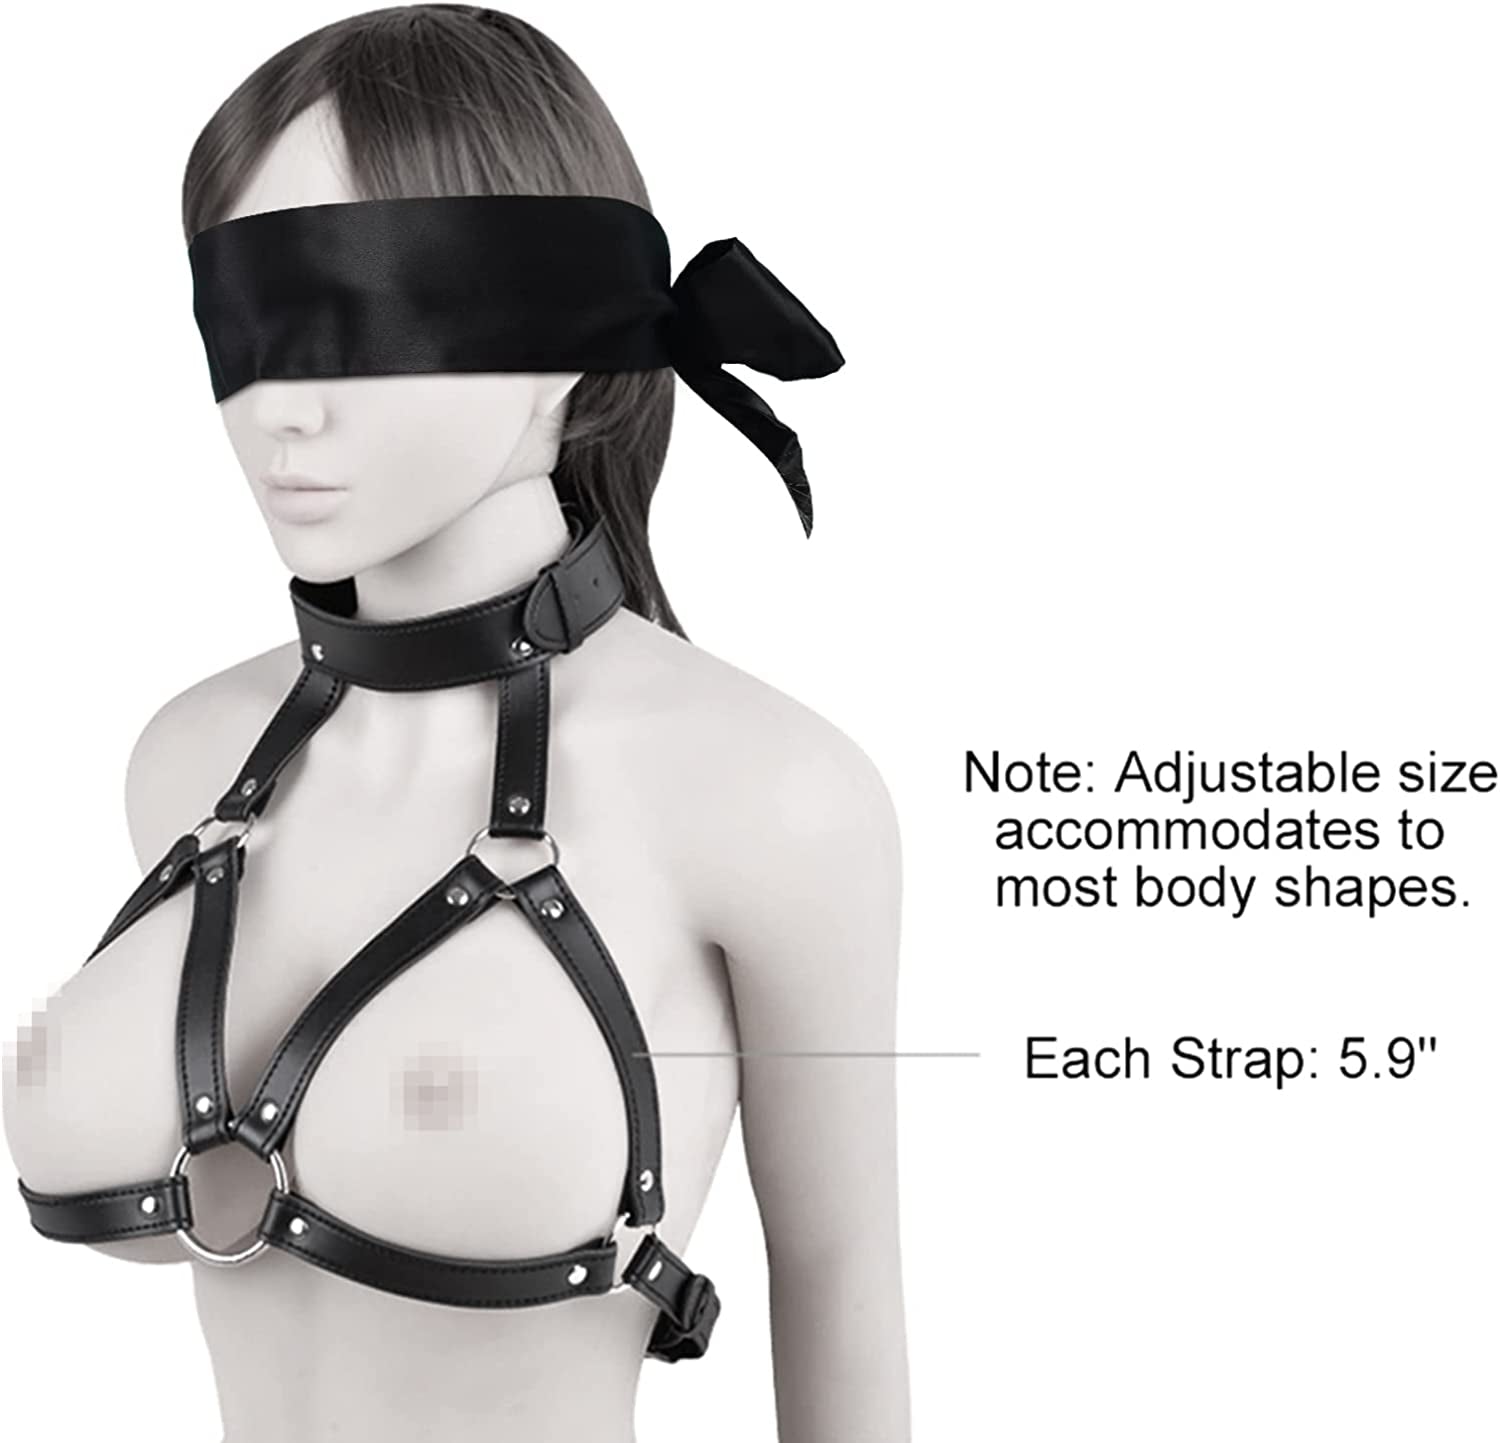 BDSM Nipple Clamp Chest Harness